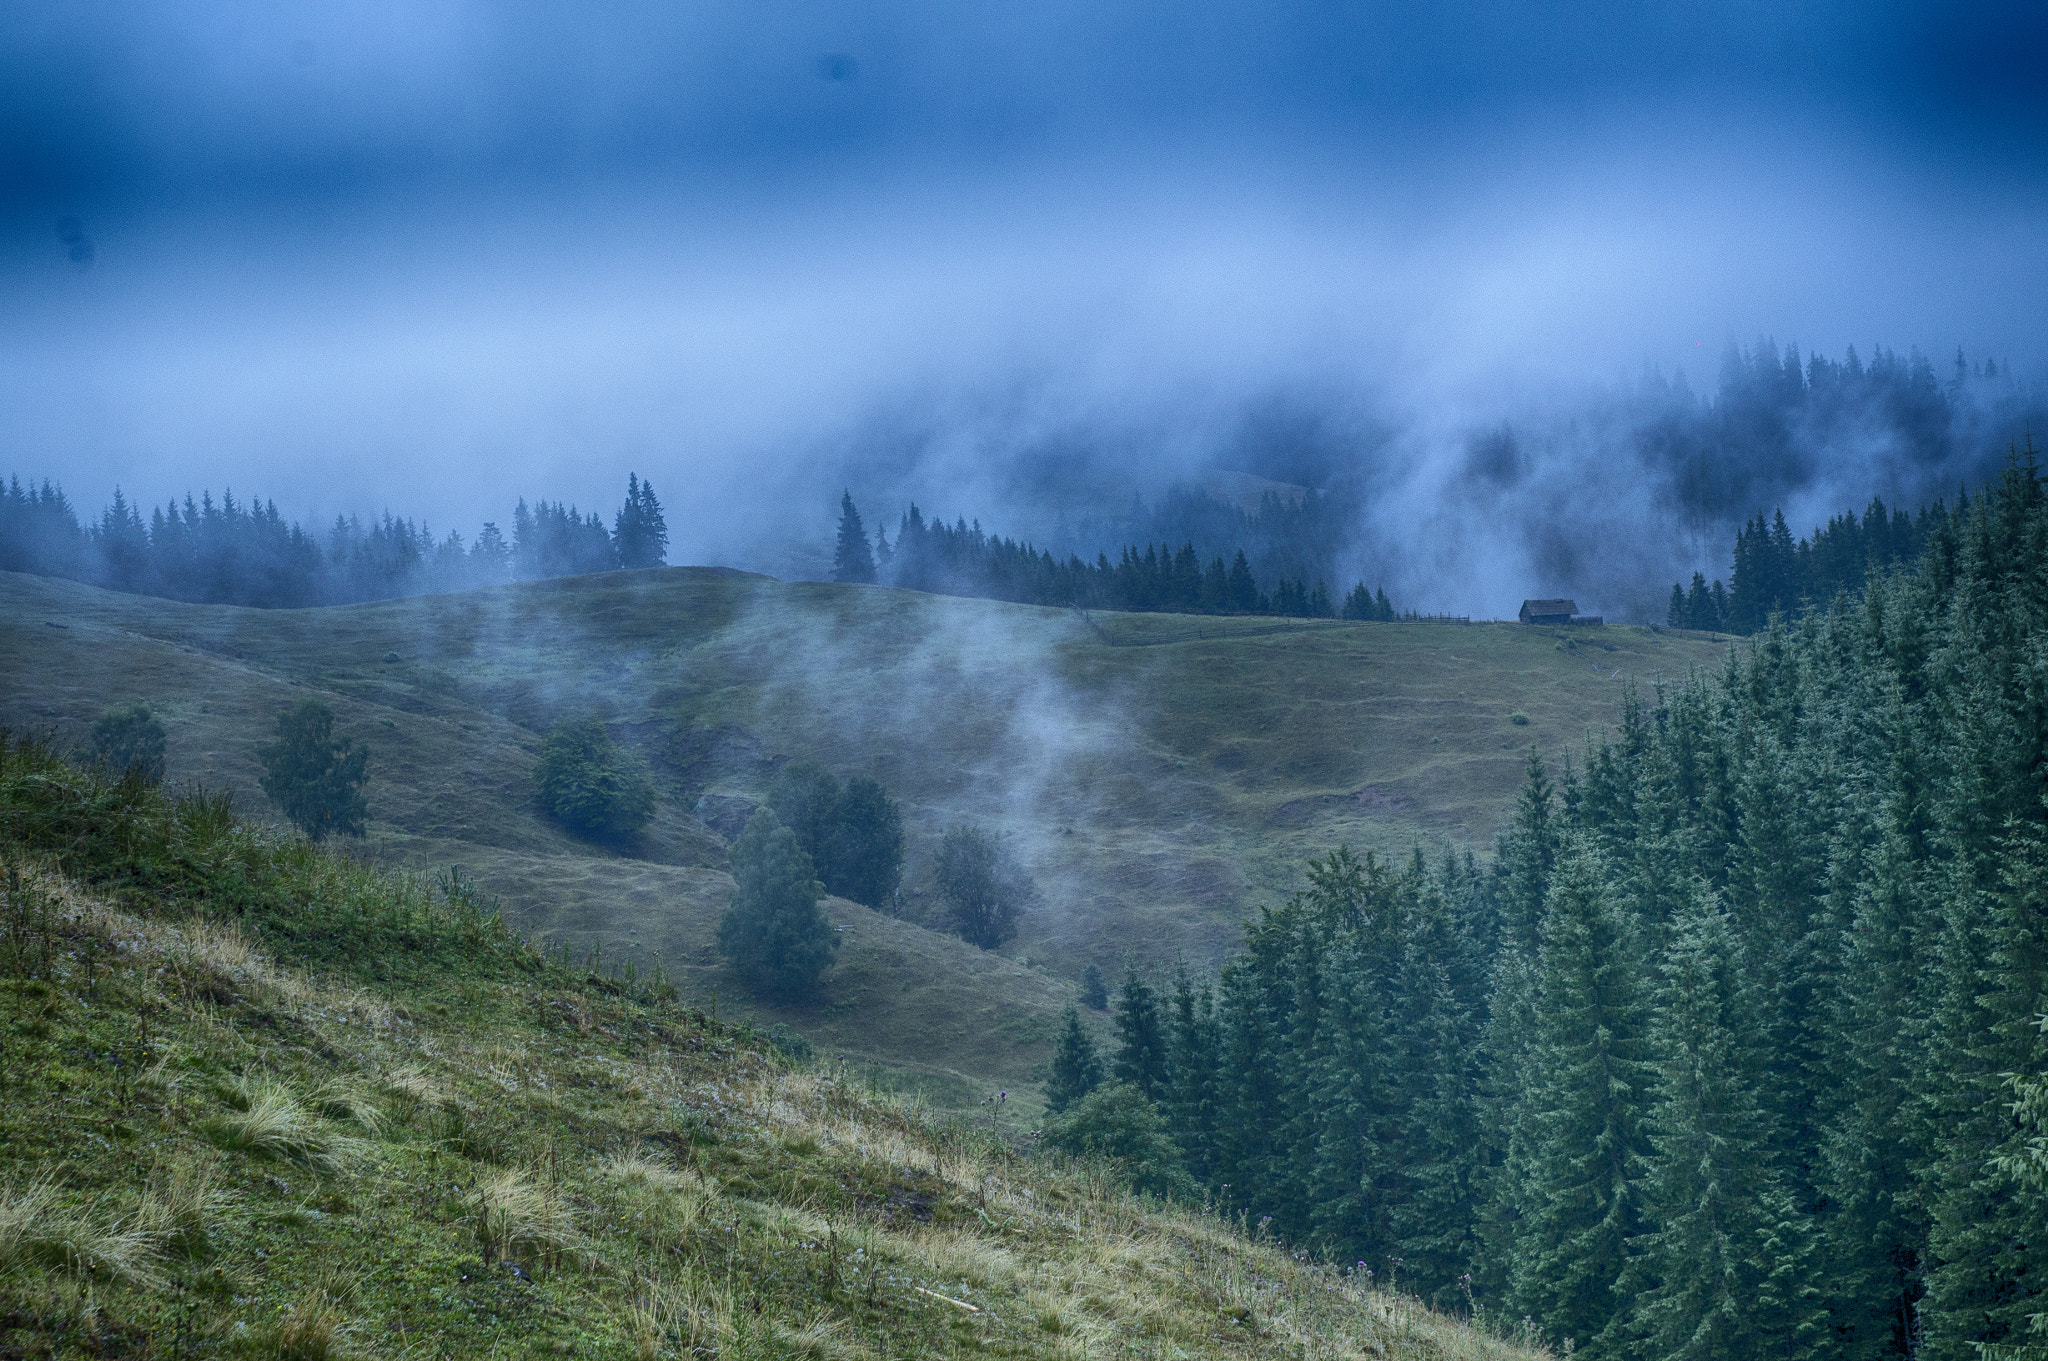 Sony SLT-A57 sample photo. My misty mornings on the mountains part 3 photography